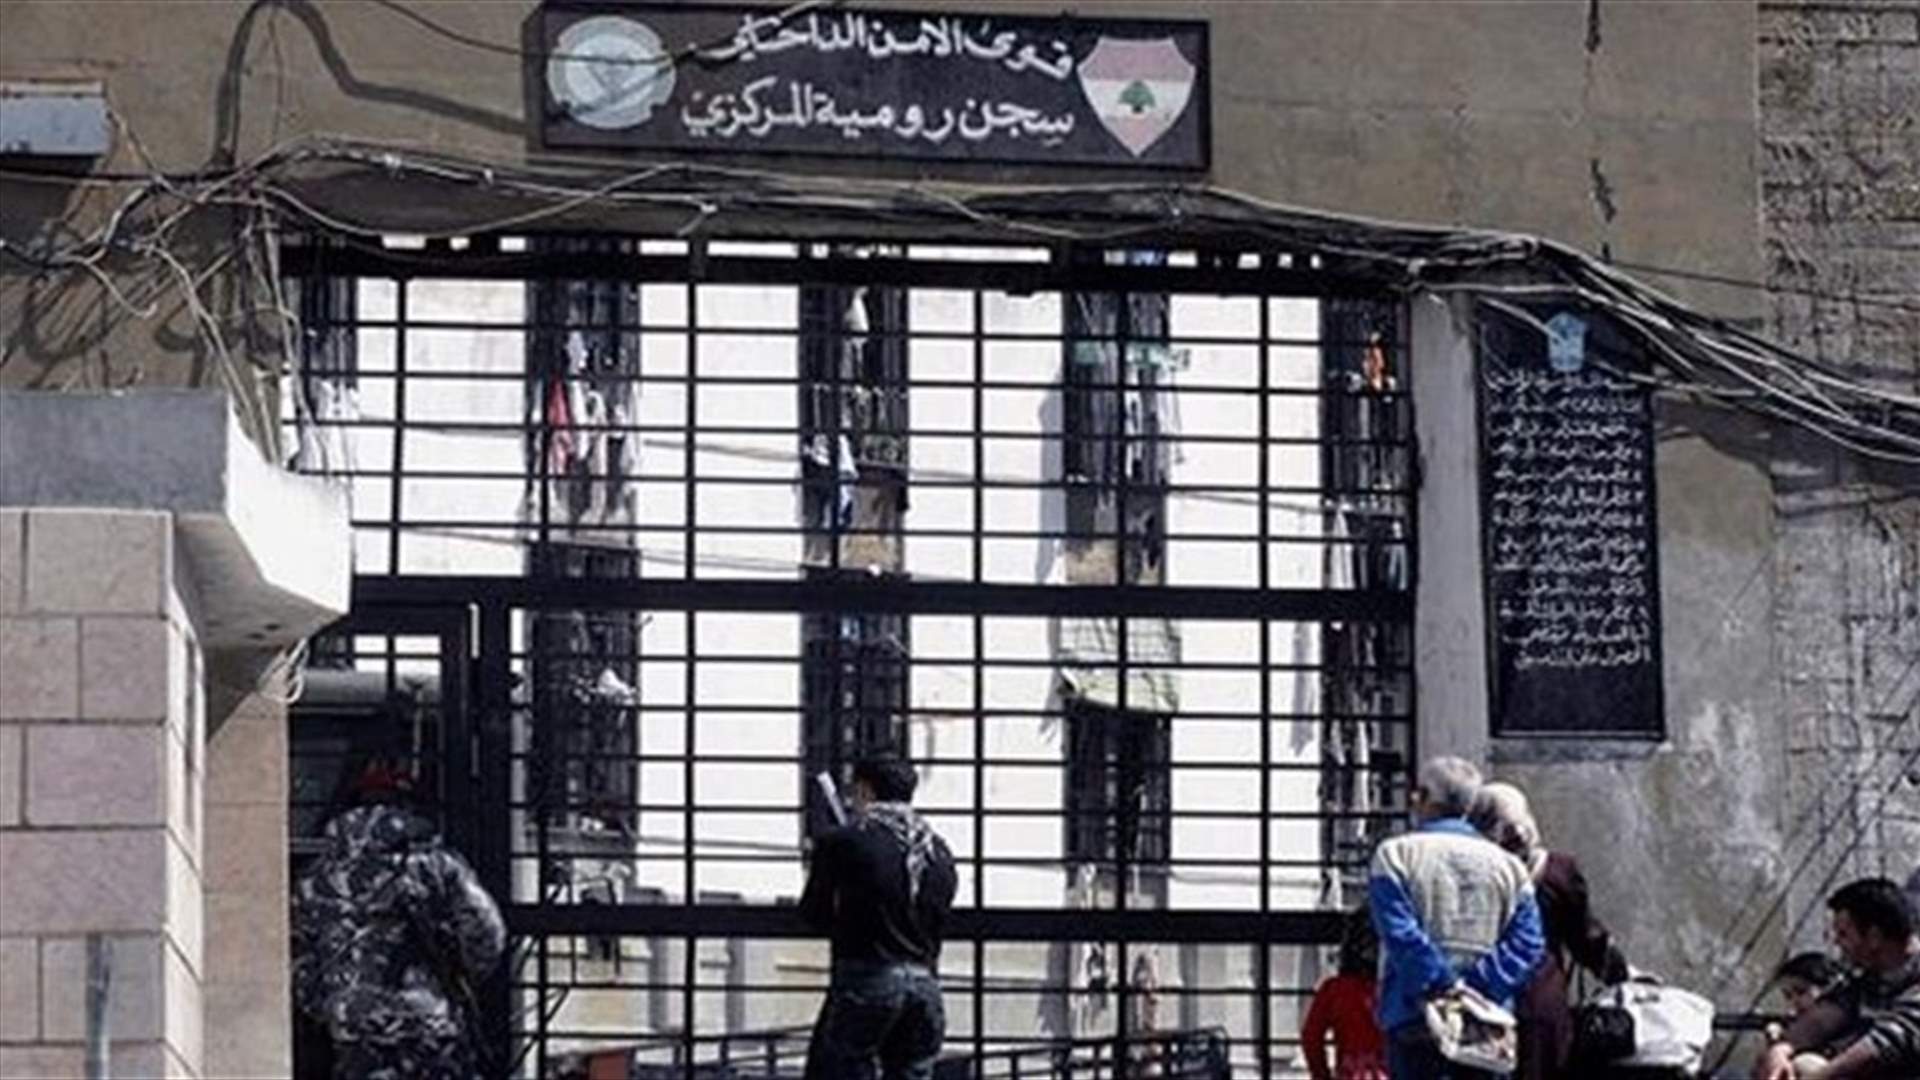 Islamist inmates at Roumieh prison suspend hunger strike